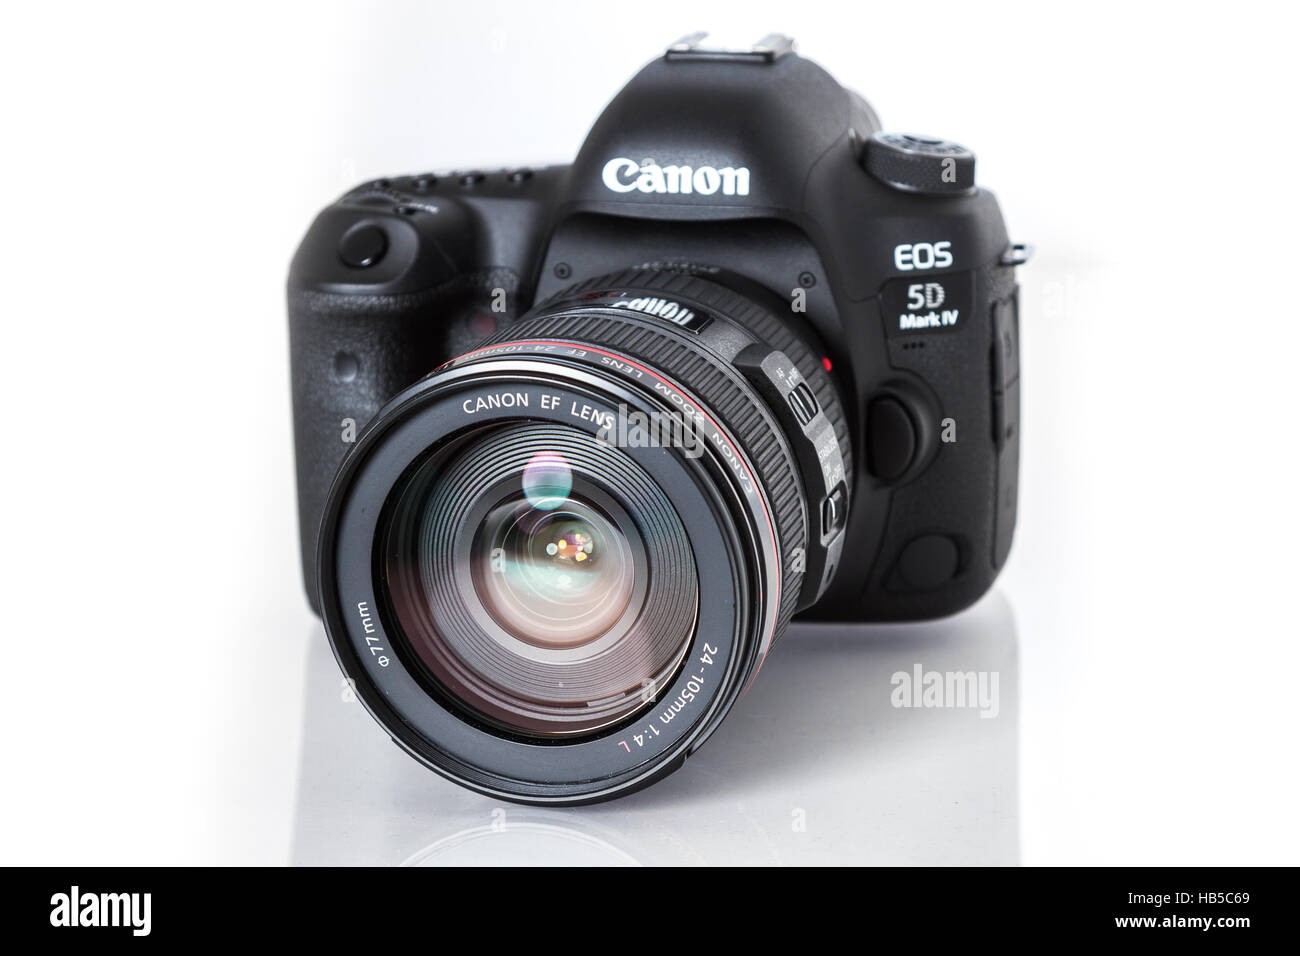 Canon 5D Mark IV camera with Canon EF 24-105 mm f/4 II USM lens on a white background Stock Photo